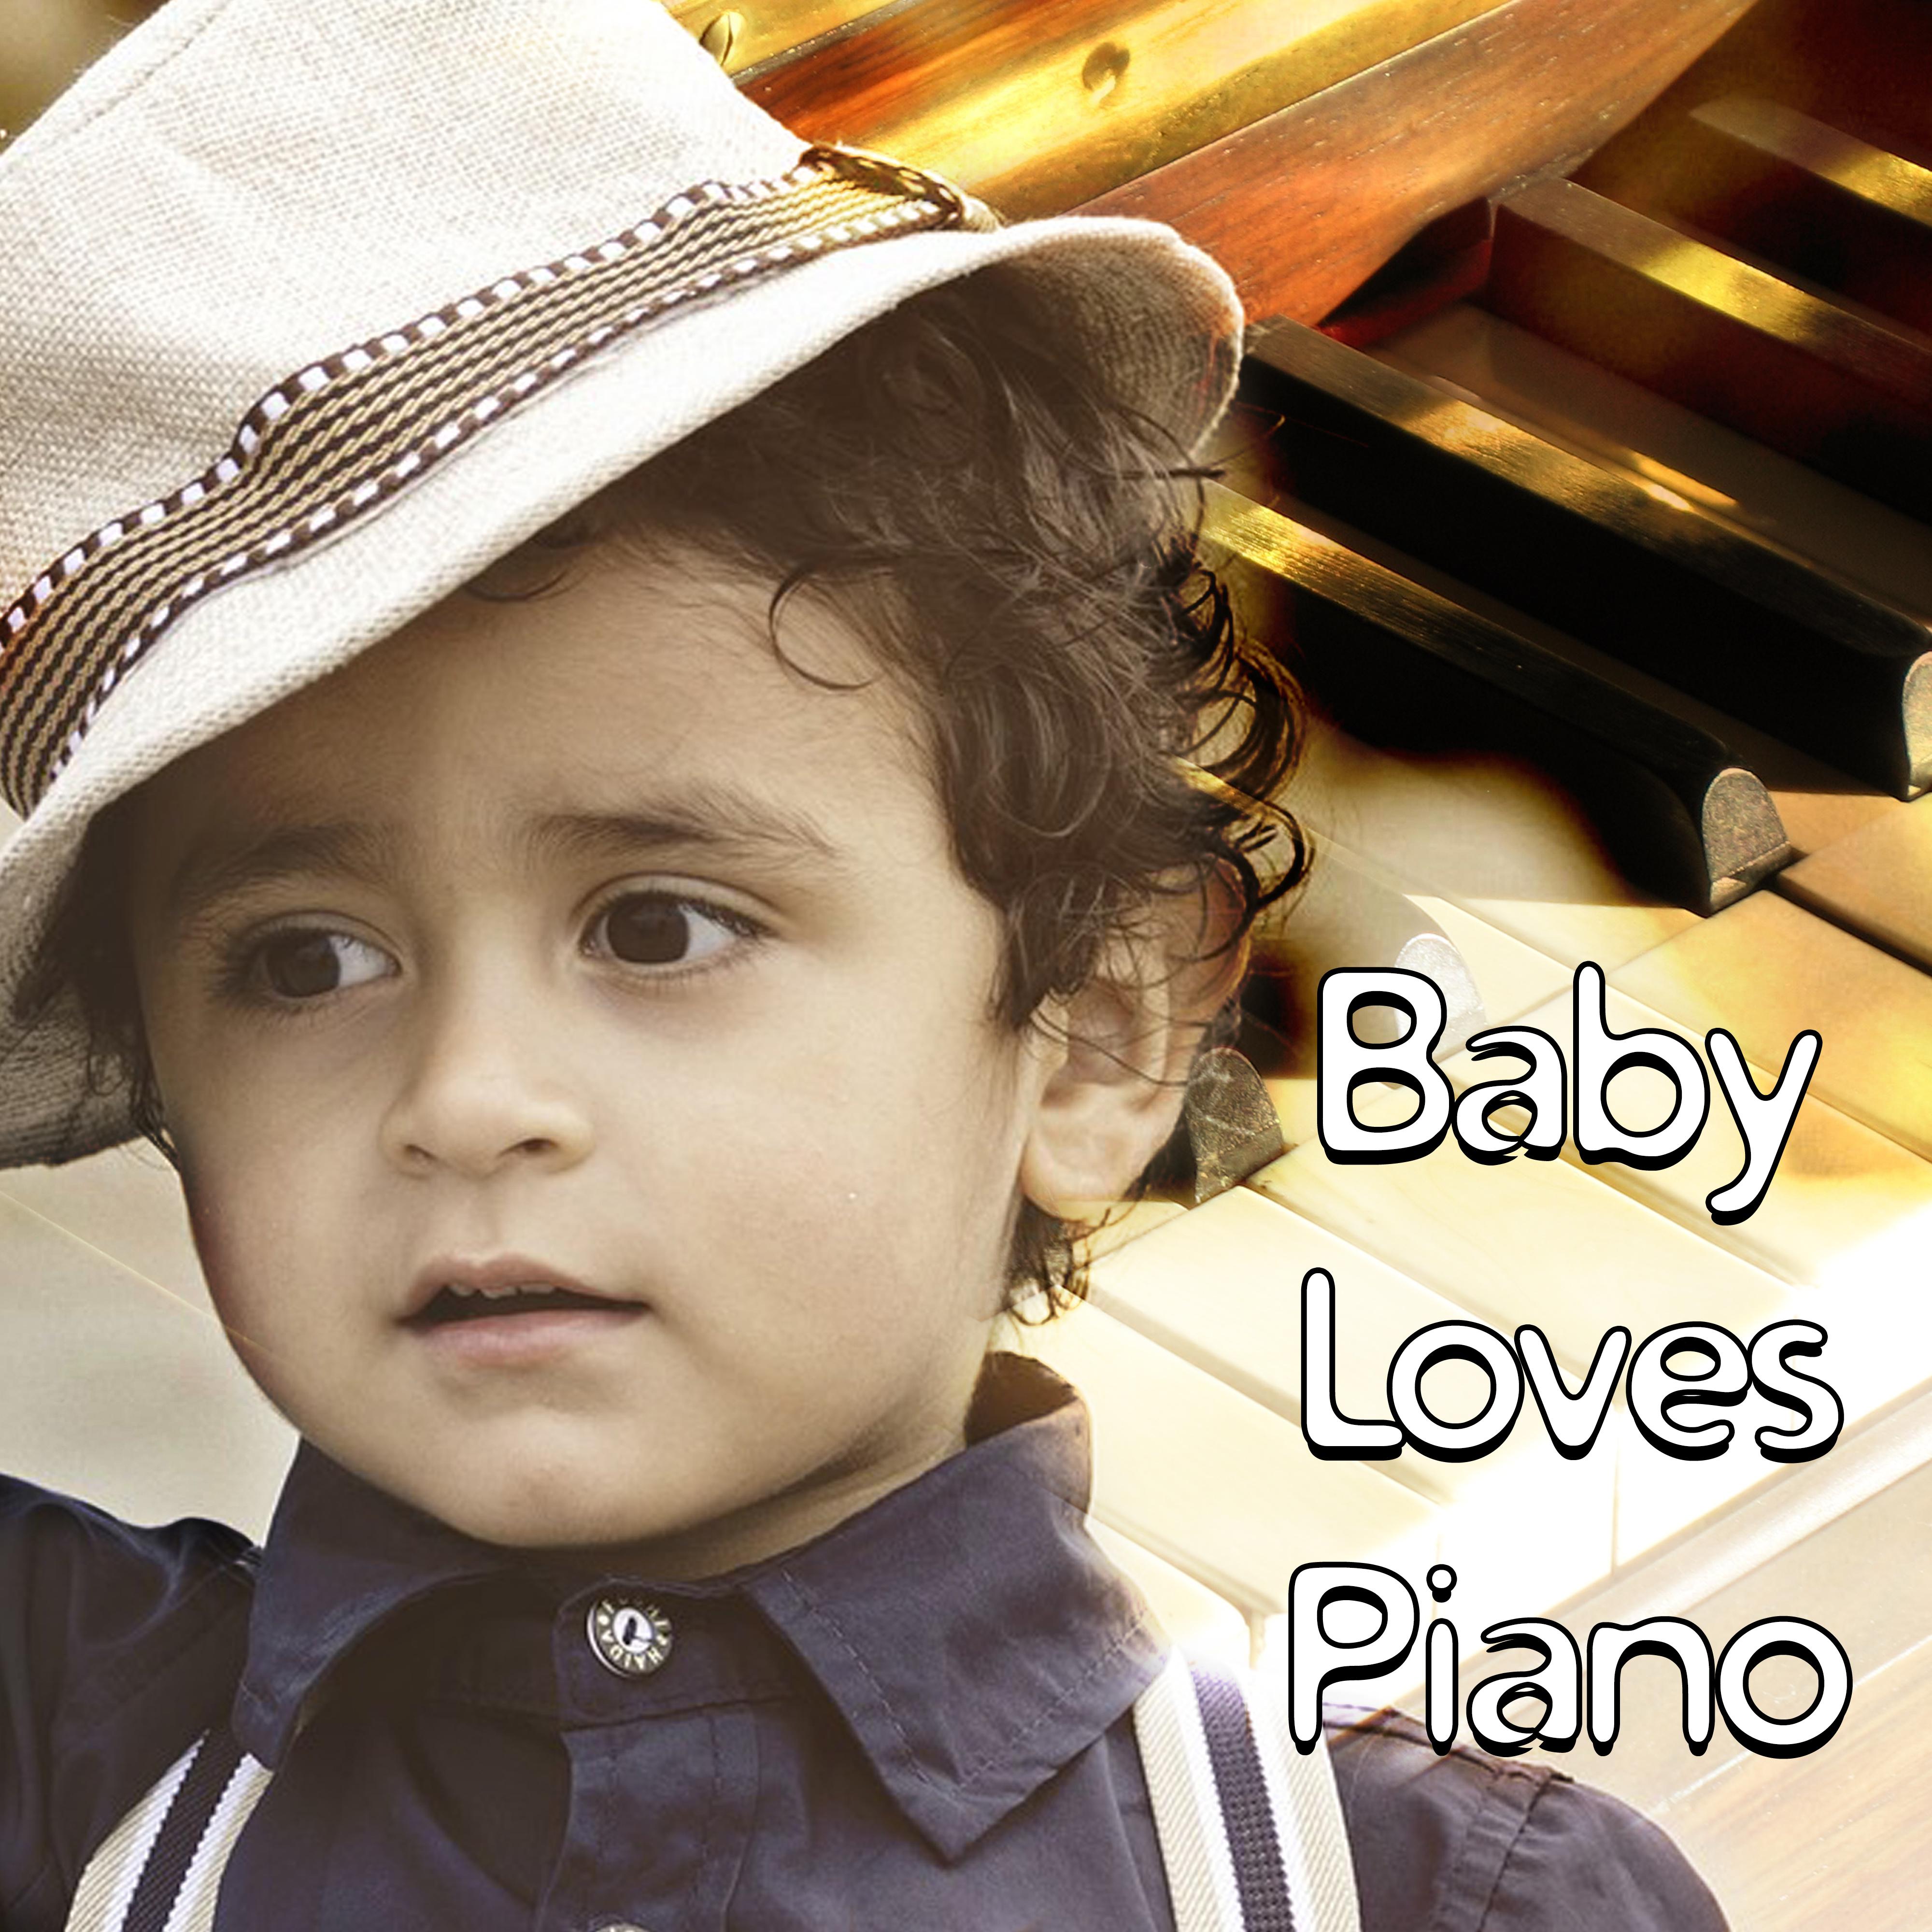 Baby Loves Piano – Best Classical Music for Baby, Soothing Sounds for Relaxation, Brain Power, Development of Child, Gentle Piano